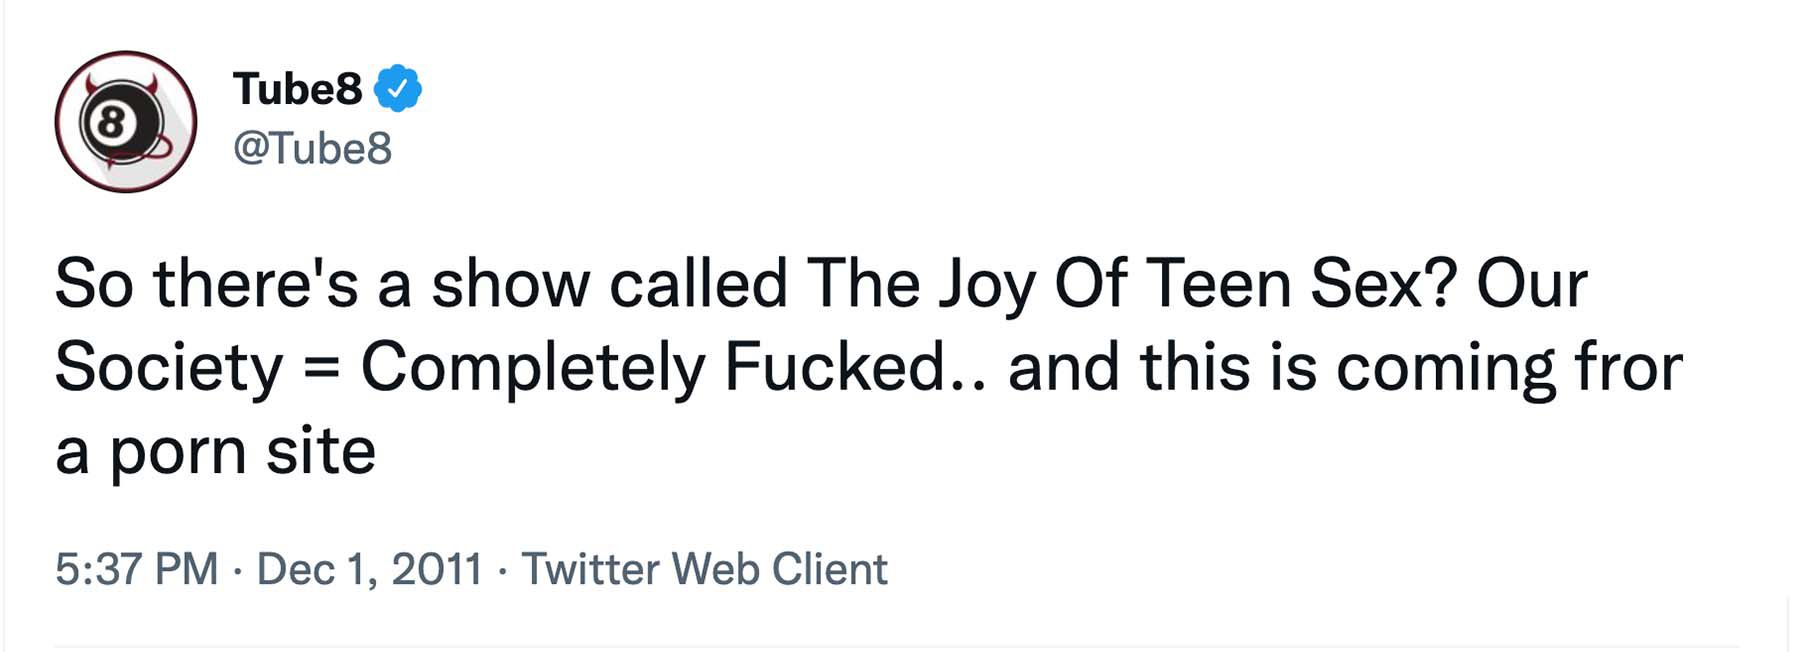 A tweet from Tube8 on December 1, 2011 that reads, “So there’s a show called The Joy Of Teen Sex? Our Society = Completely Fucked.. and this is coming fror a porn site”